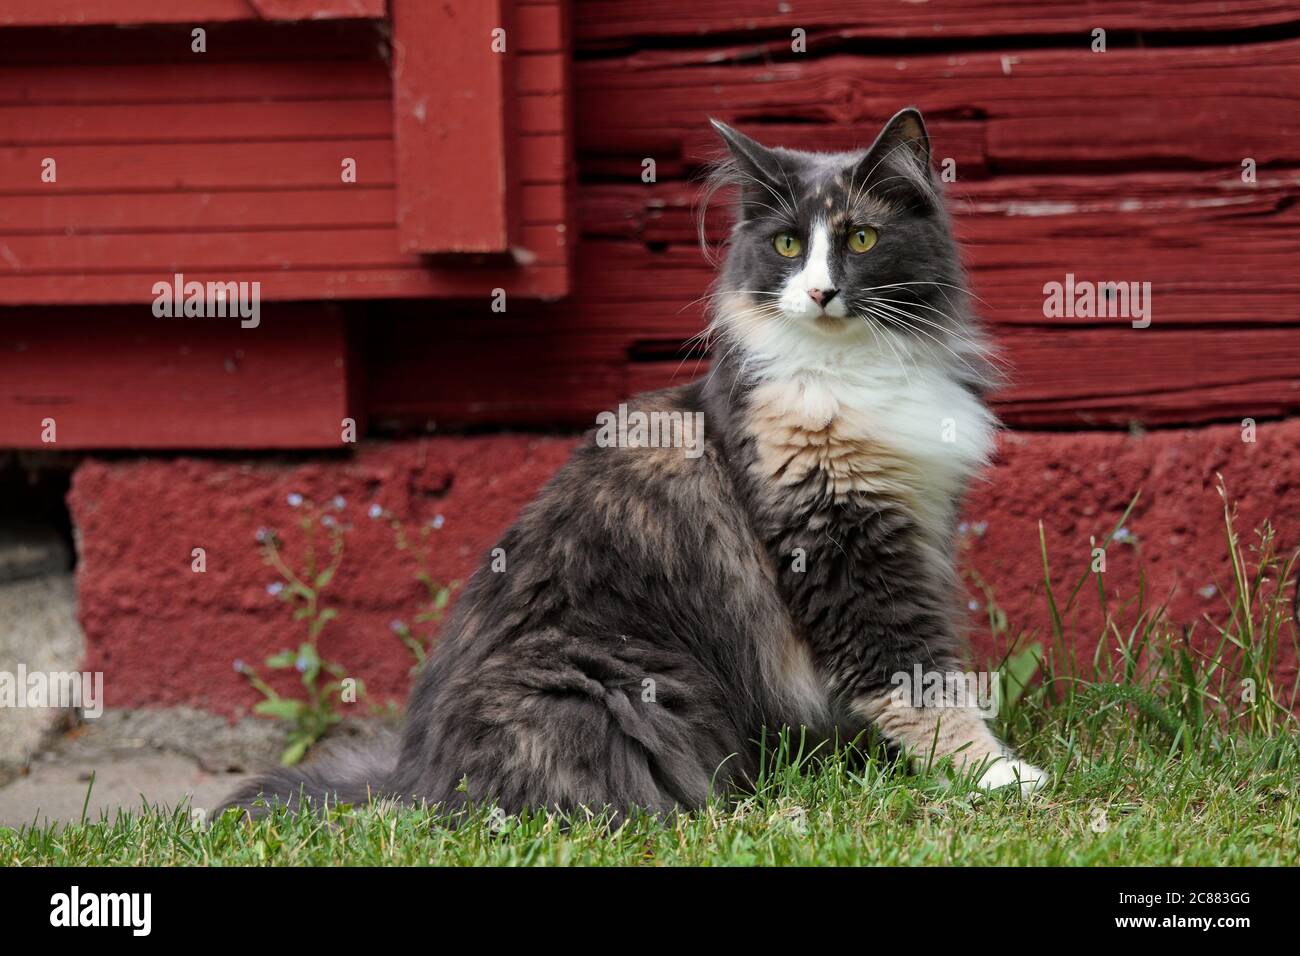 A beautiful norwegian forest cat with alert expression sitting near a red painted house Stock Photo